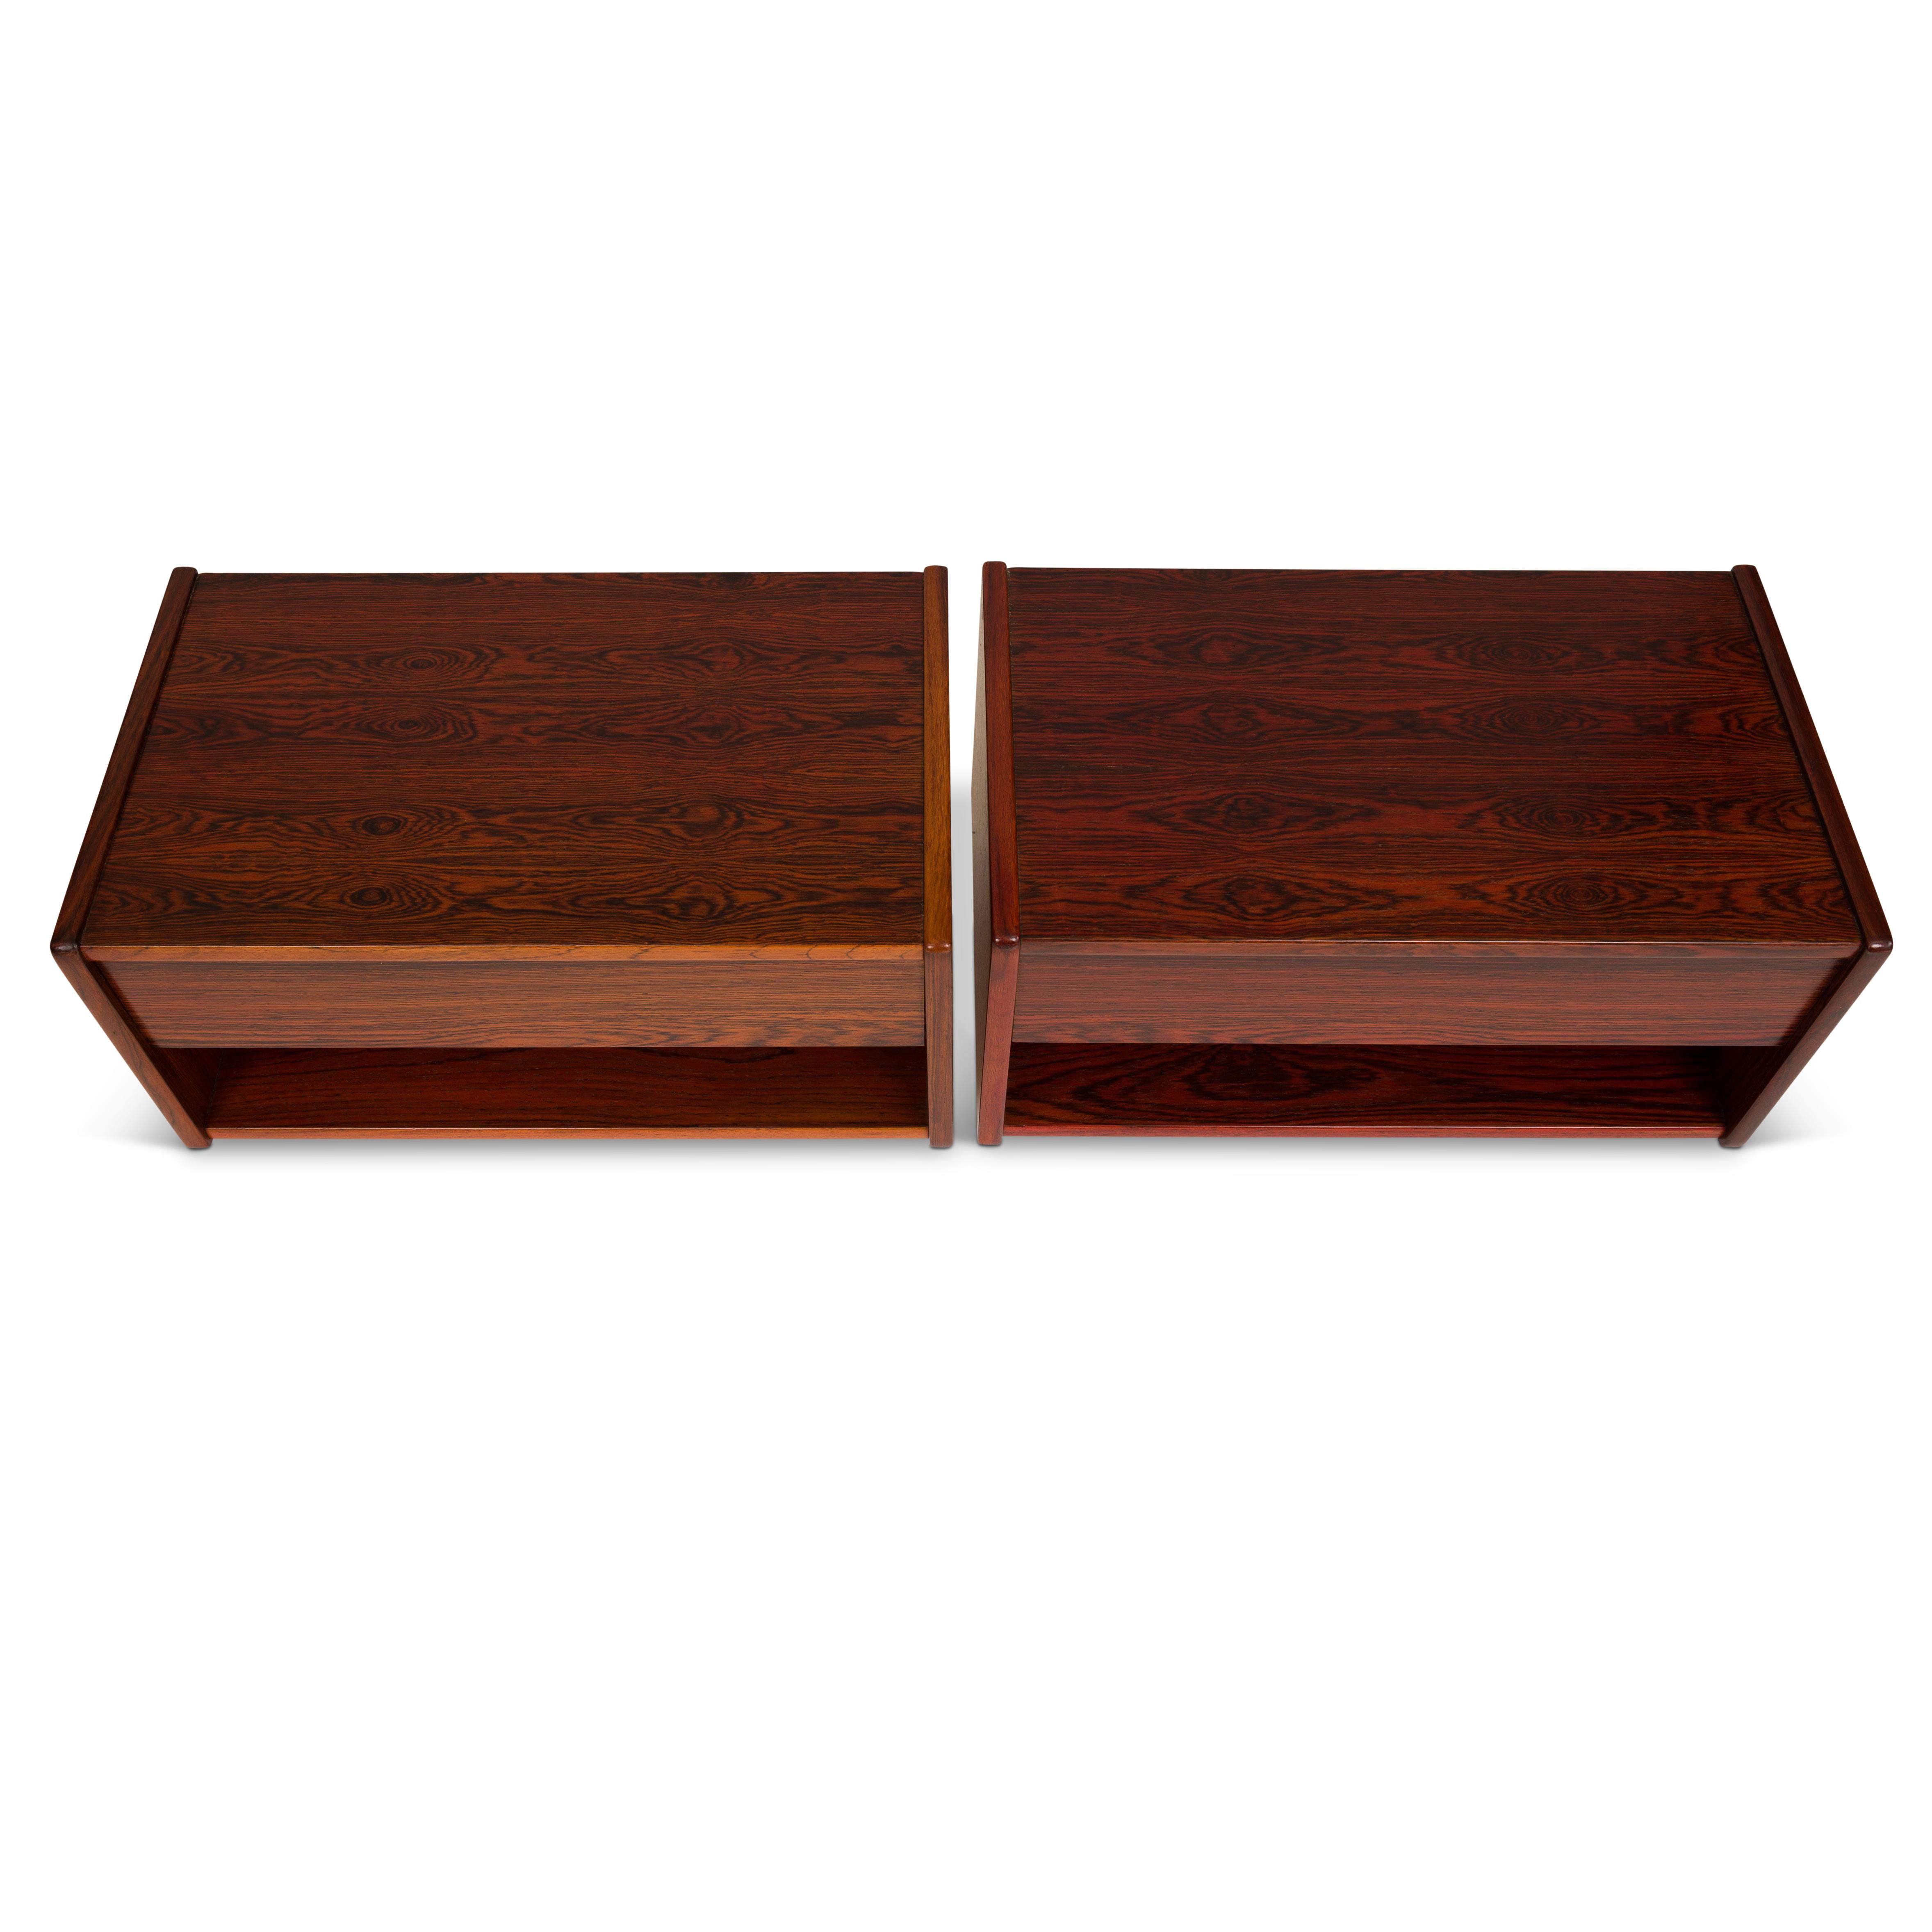 20th Century Vintage Danish Mid-Century Modern Floating Rosewood Nightstands For Sale